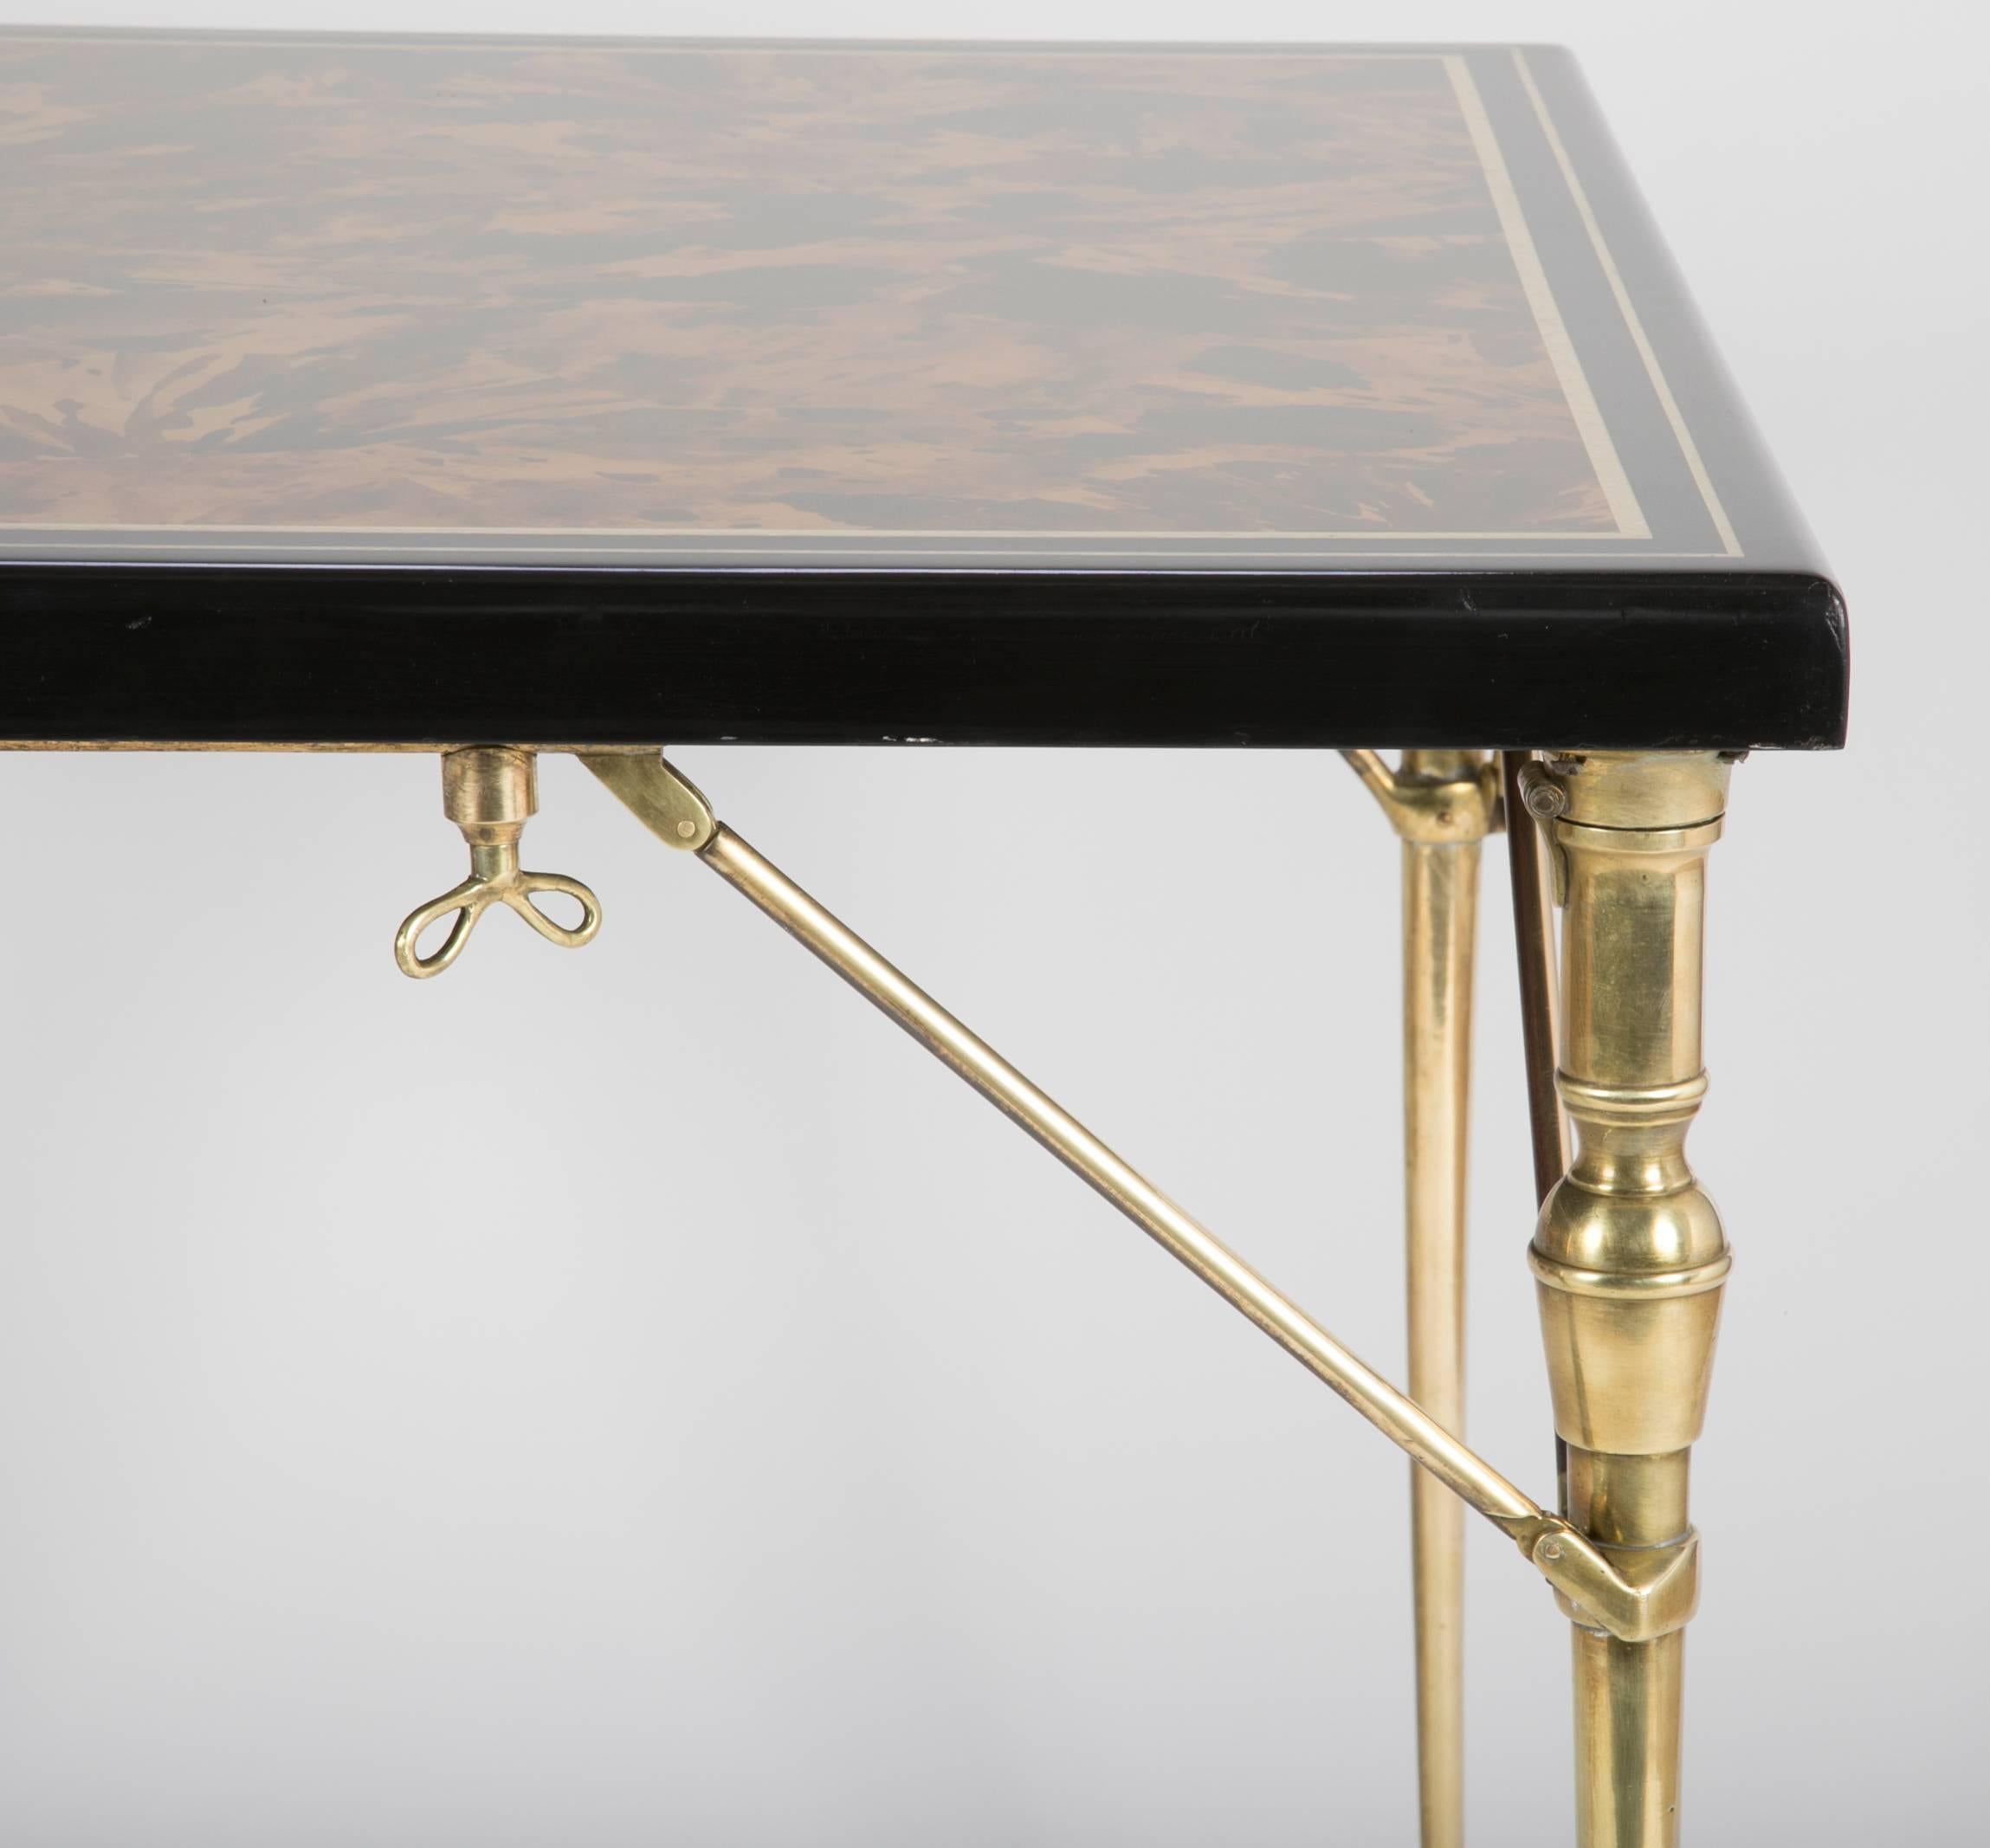 Italian Faux Tortoise Shell Black Lacquer and Gilt Games Table with Bronze Folding Legs